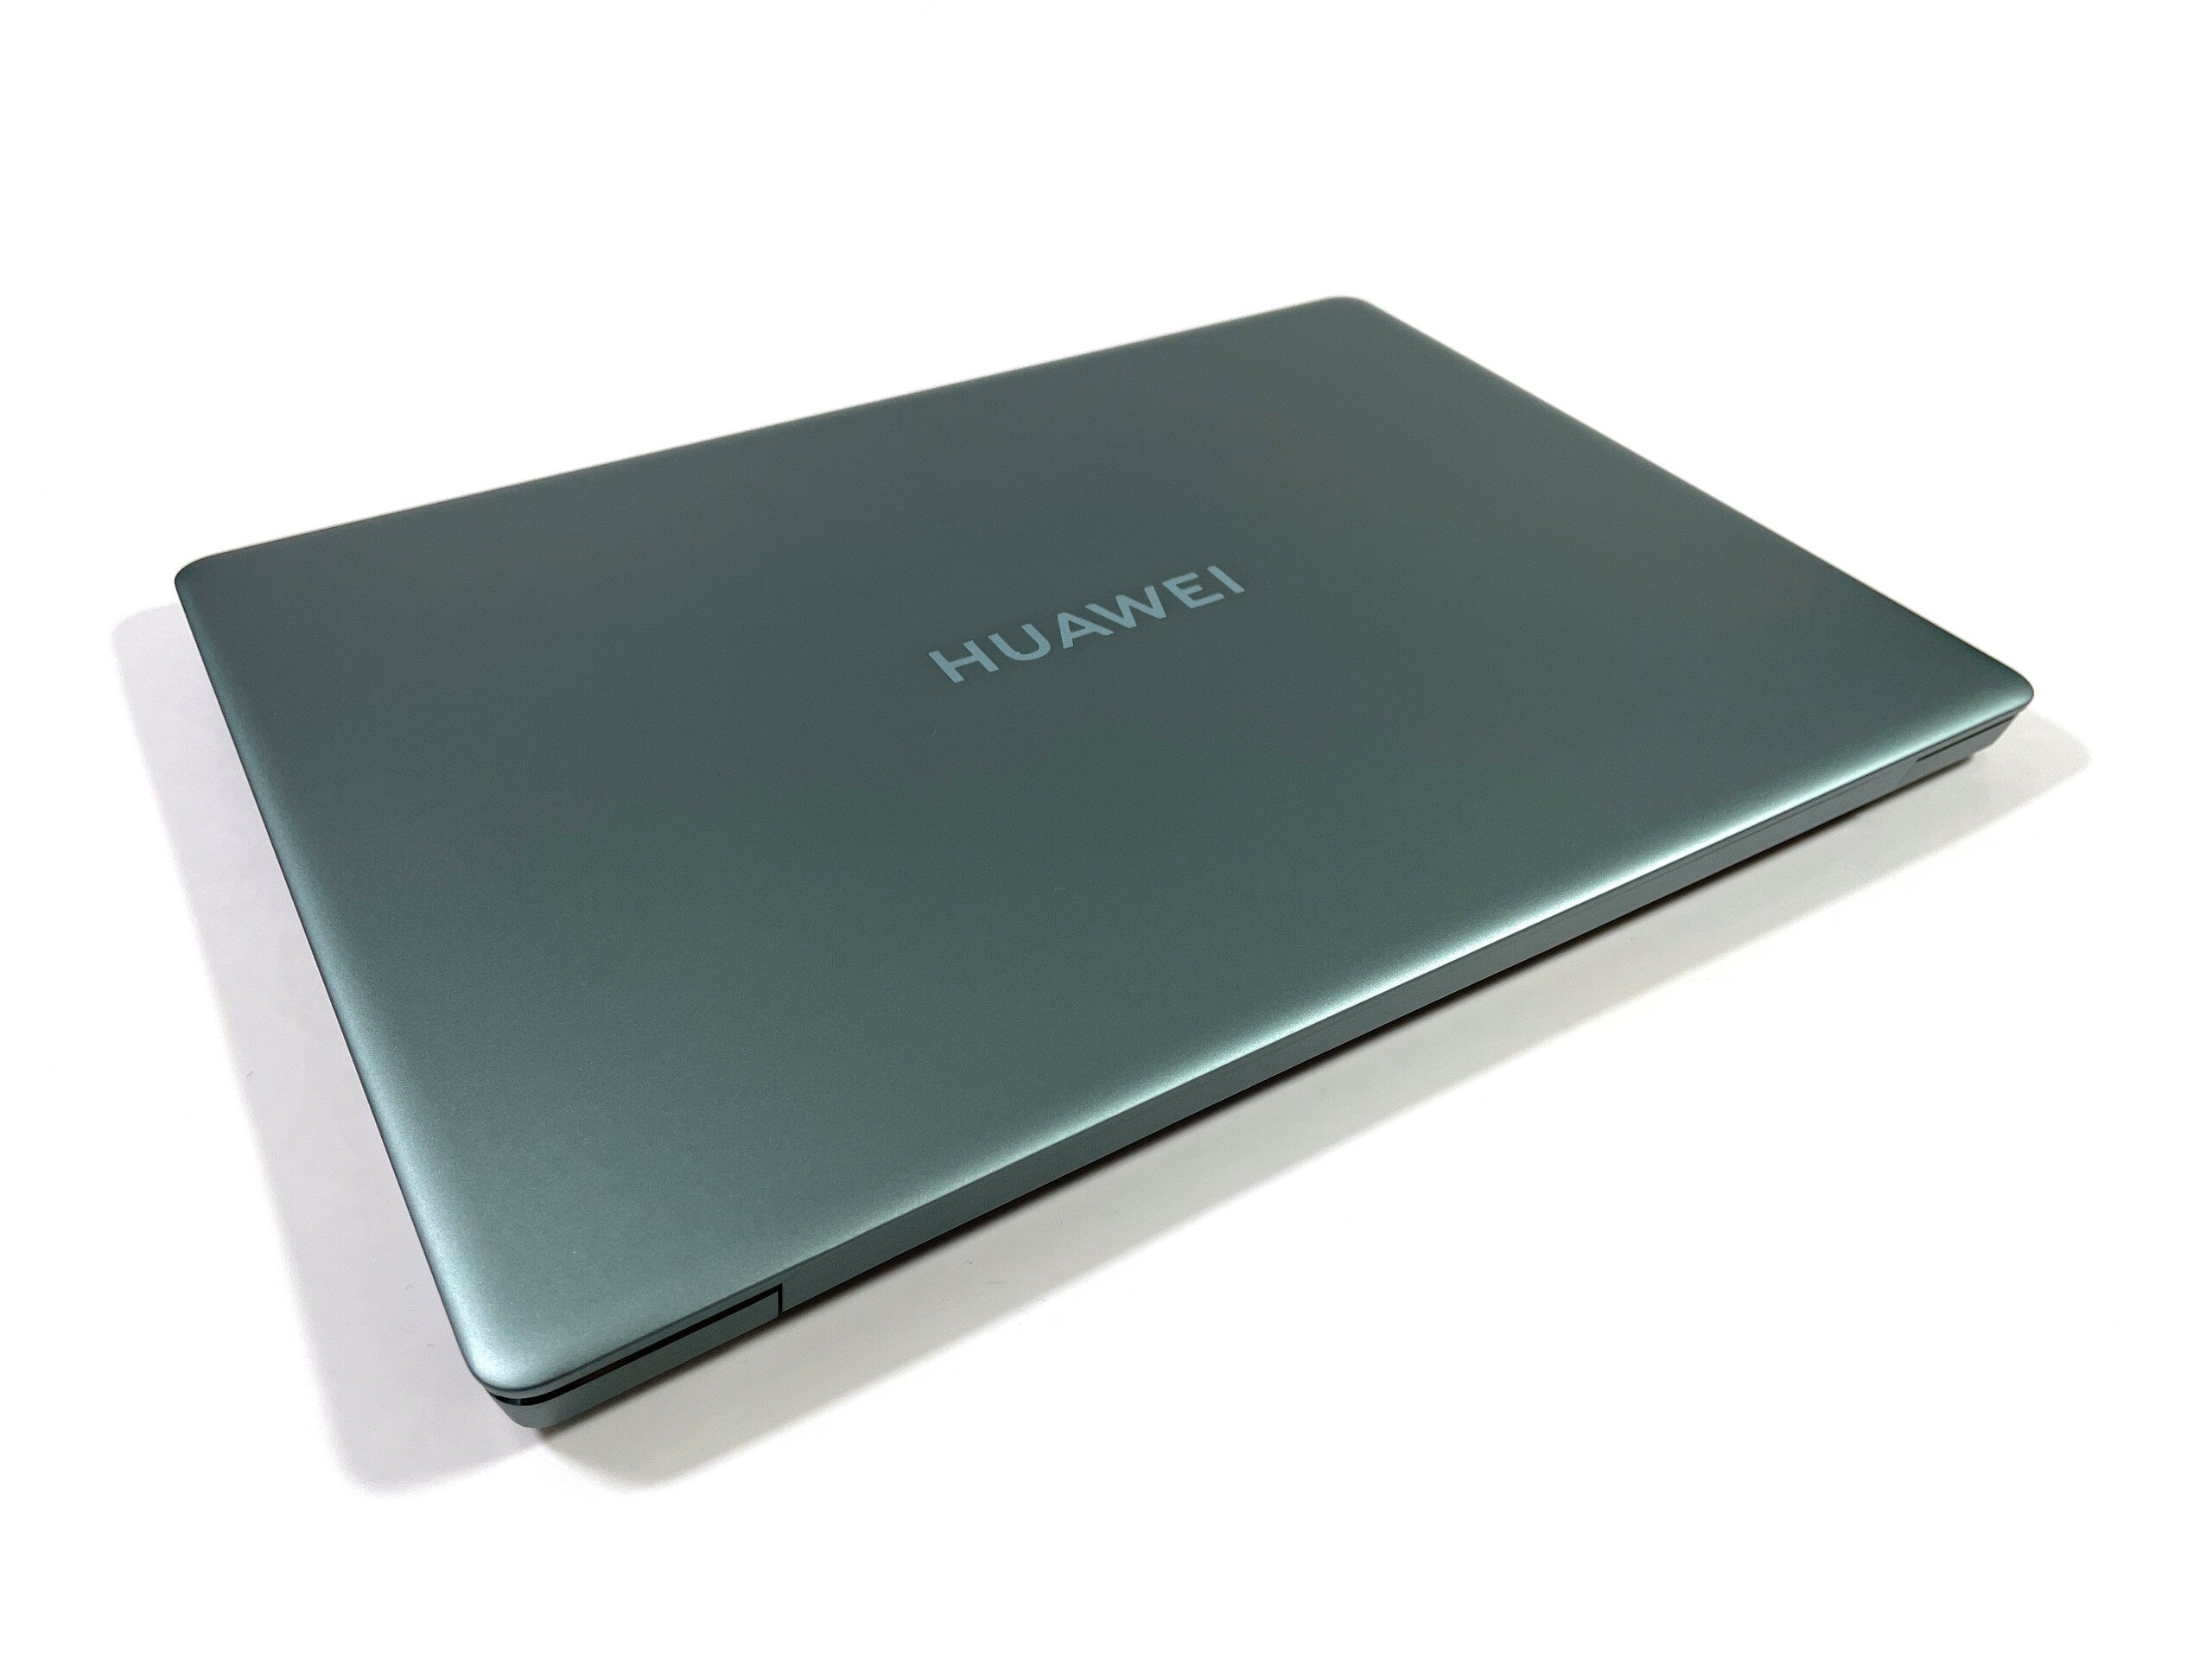 Huawei MateBook 14s Touch Screen Spruce Green HookeD-W7651T | Halabh.com